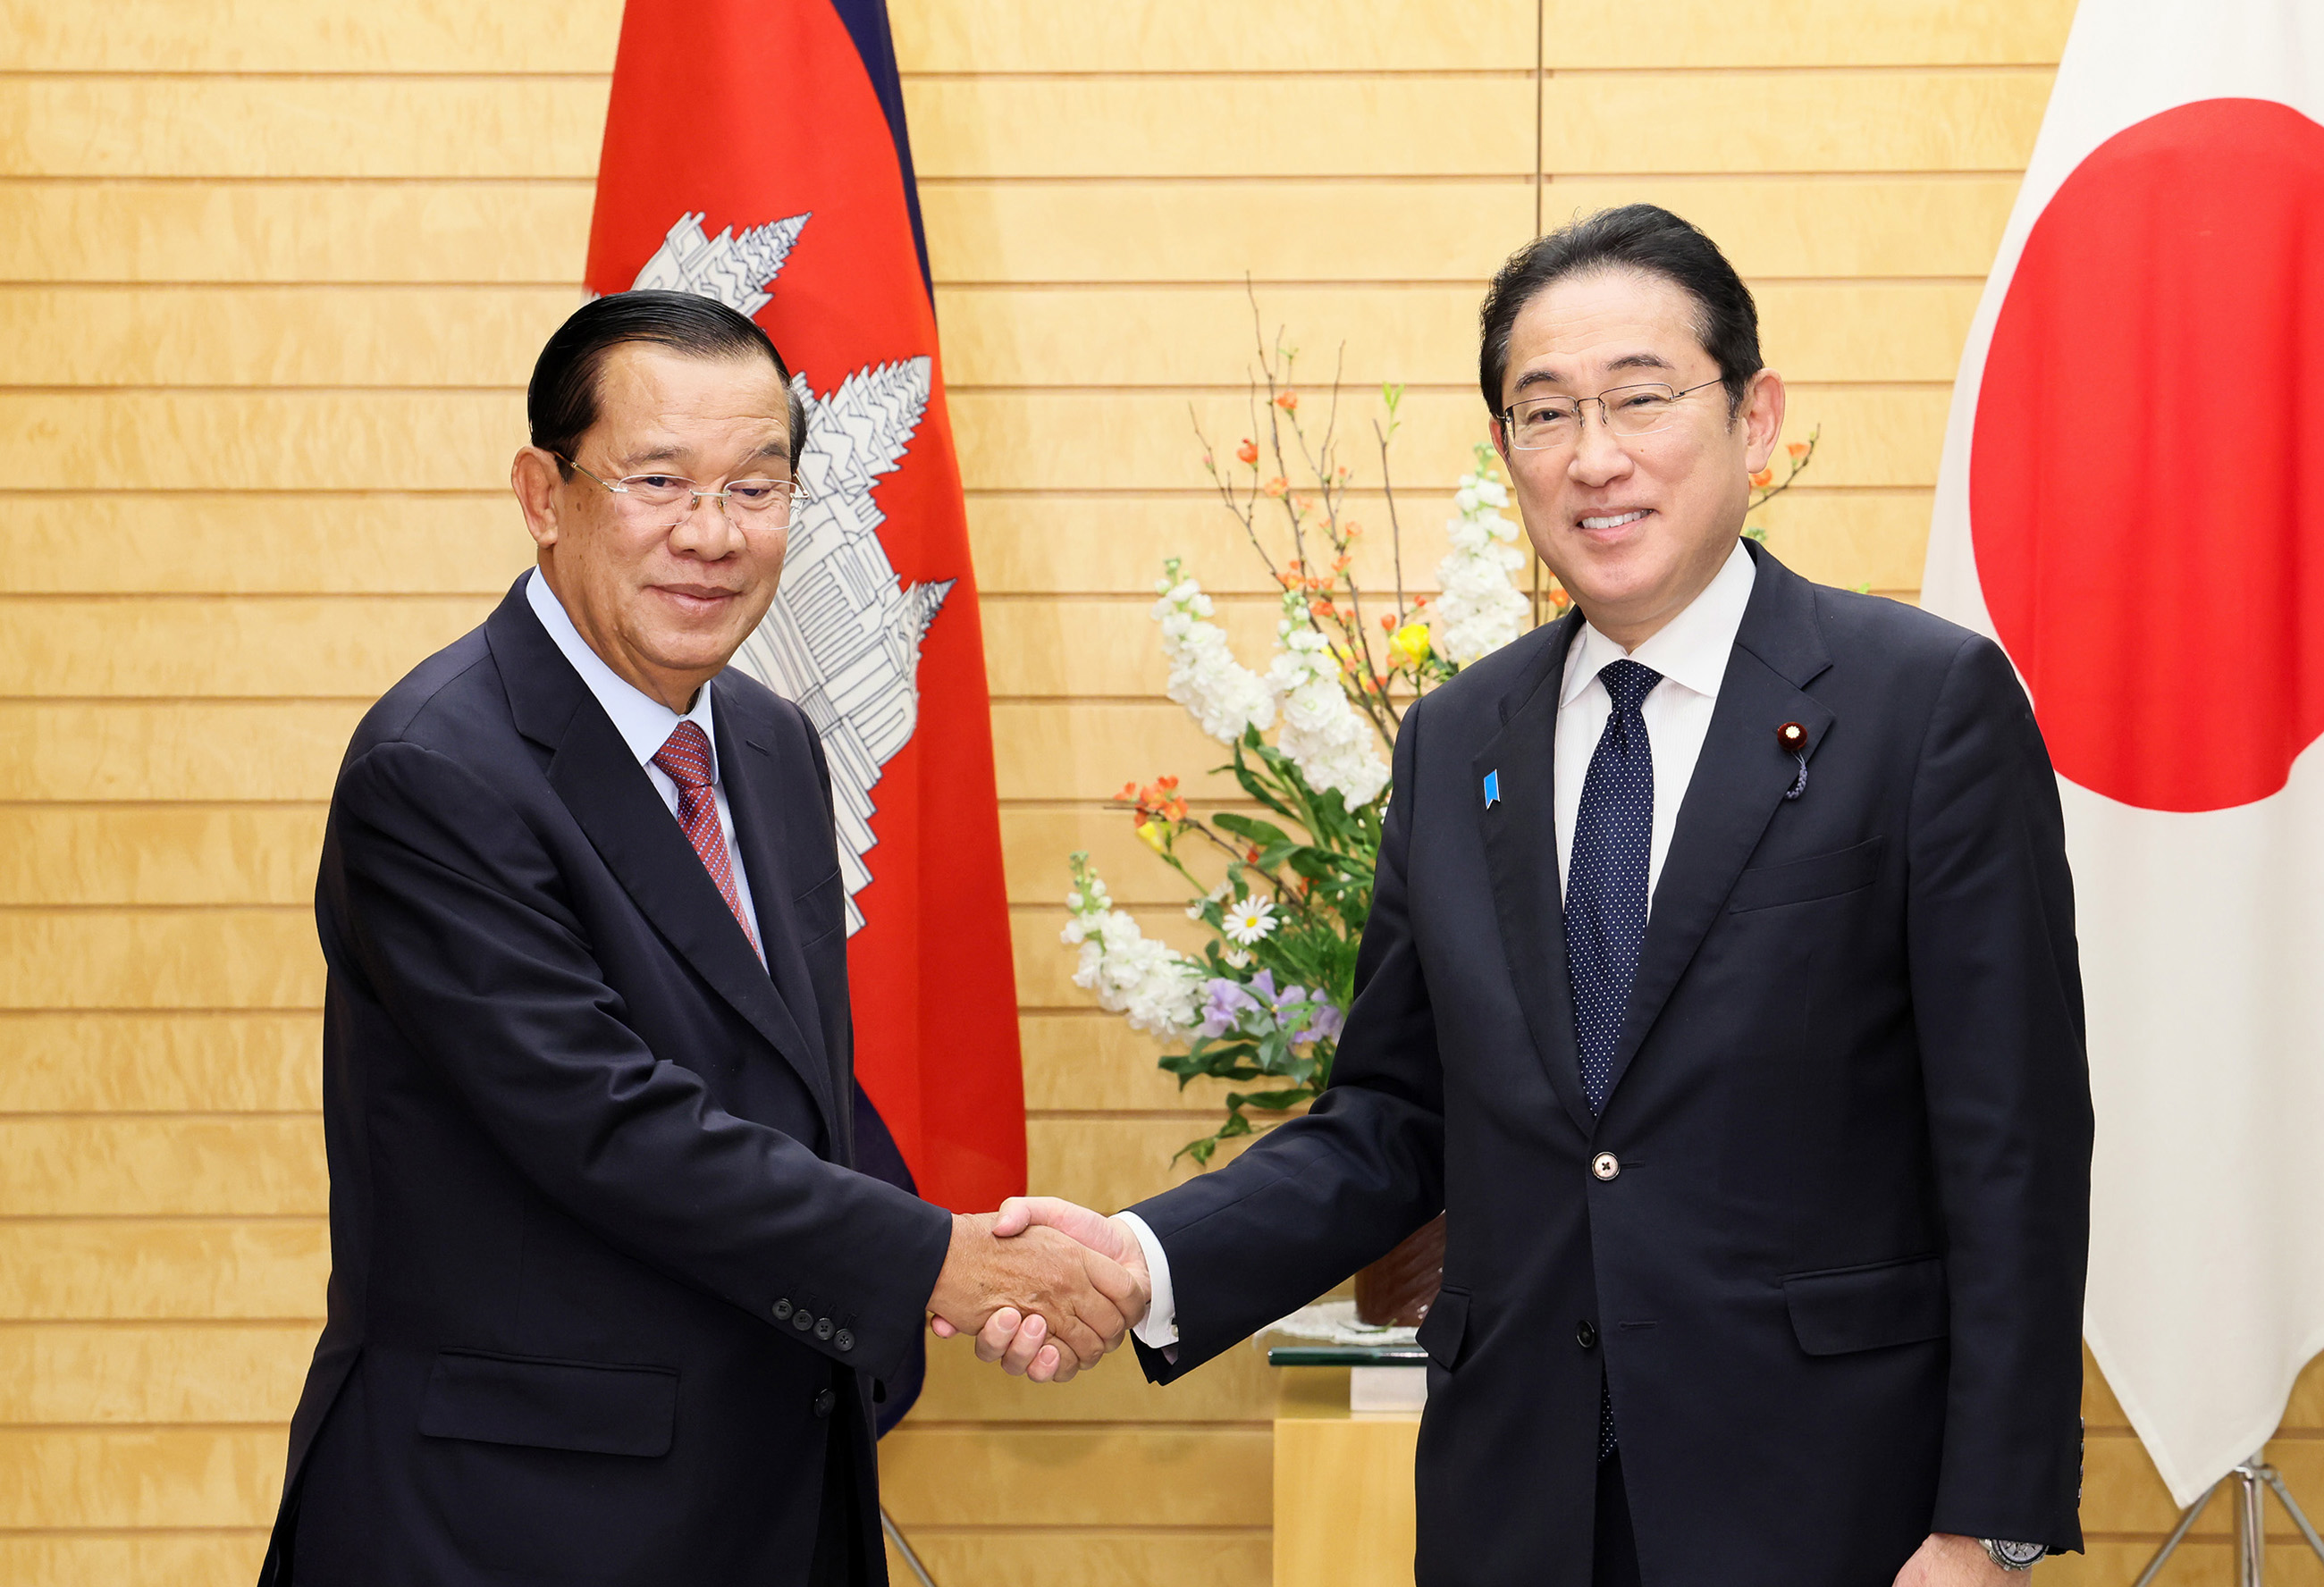 Courtesy Call from Samdech Techo Hun Sen, President of the Supreme Council of His Majesty the King of the Kingdom of Cambodia